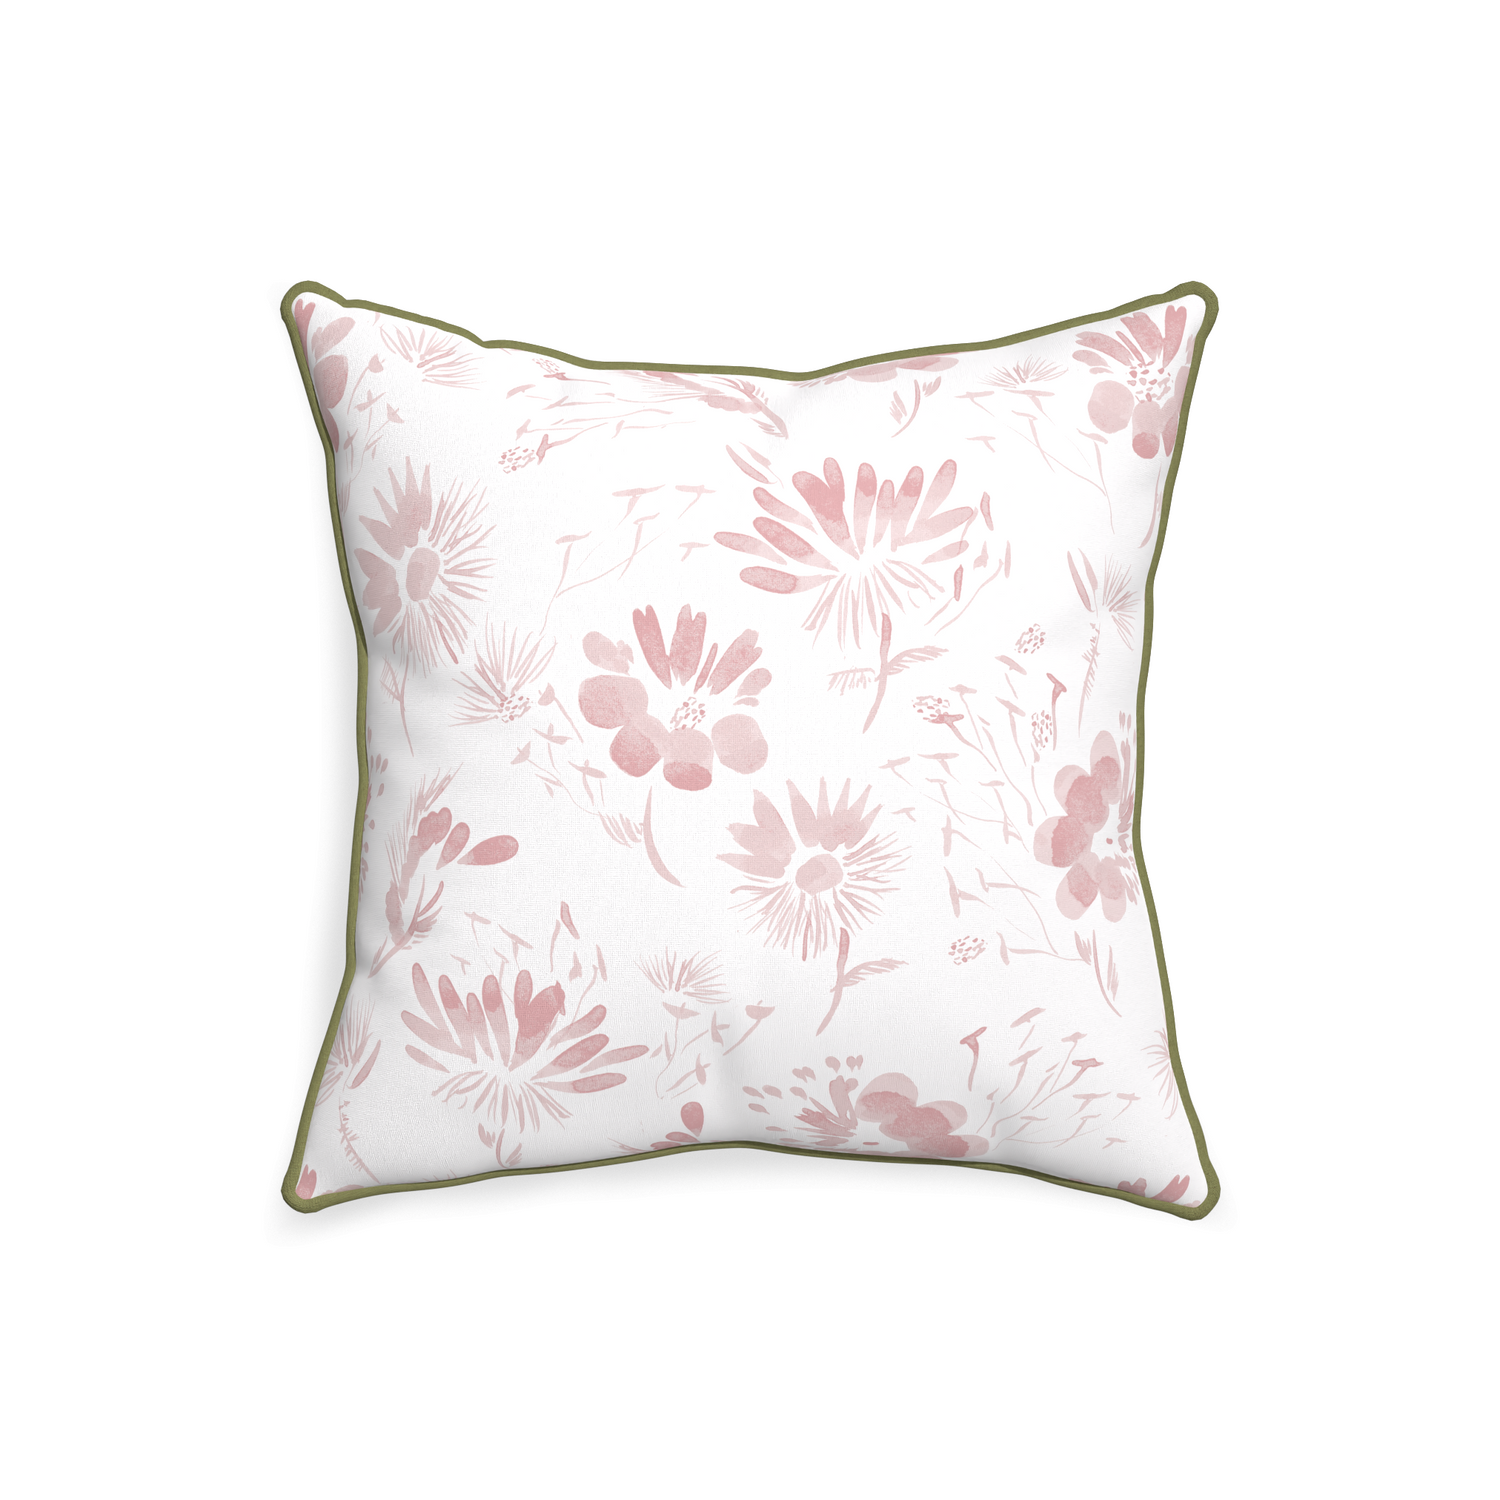 20-square blake custom pink floralpillow with moss piping on white background